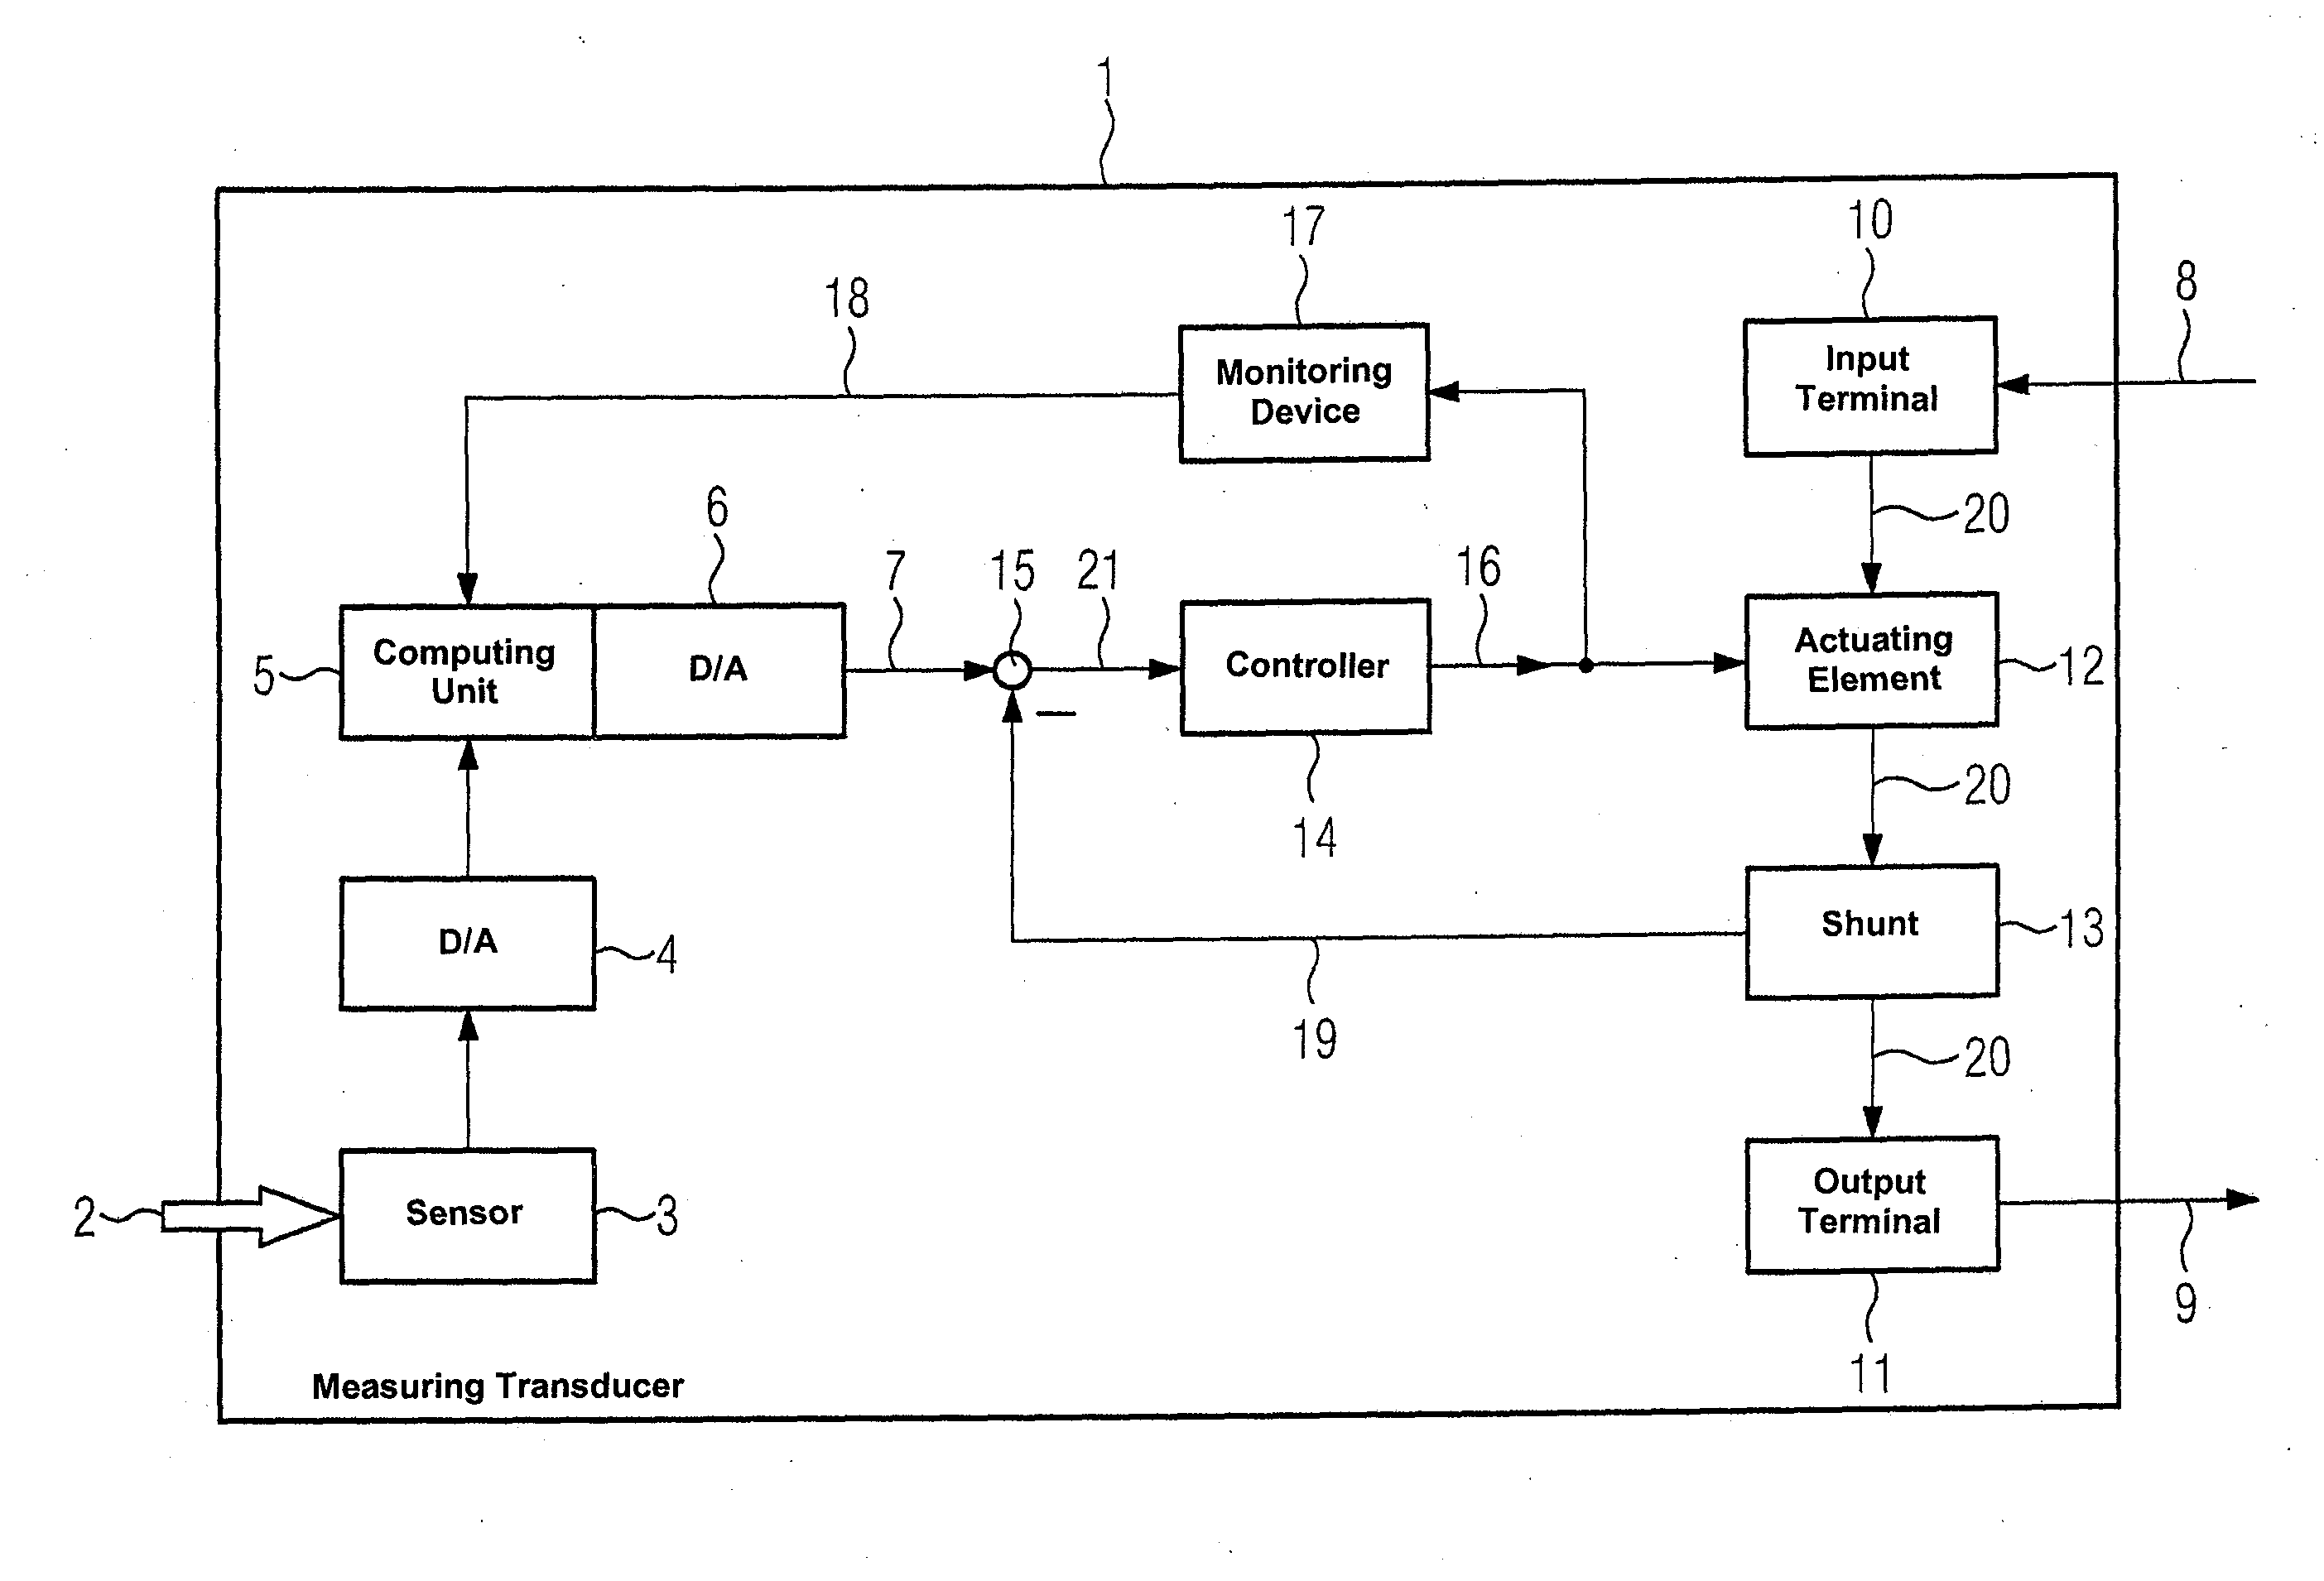 Field Device for Process Instrumentation